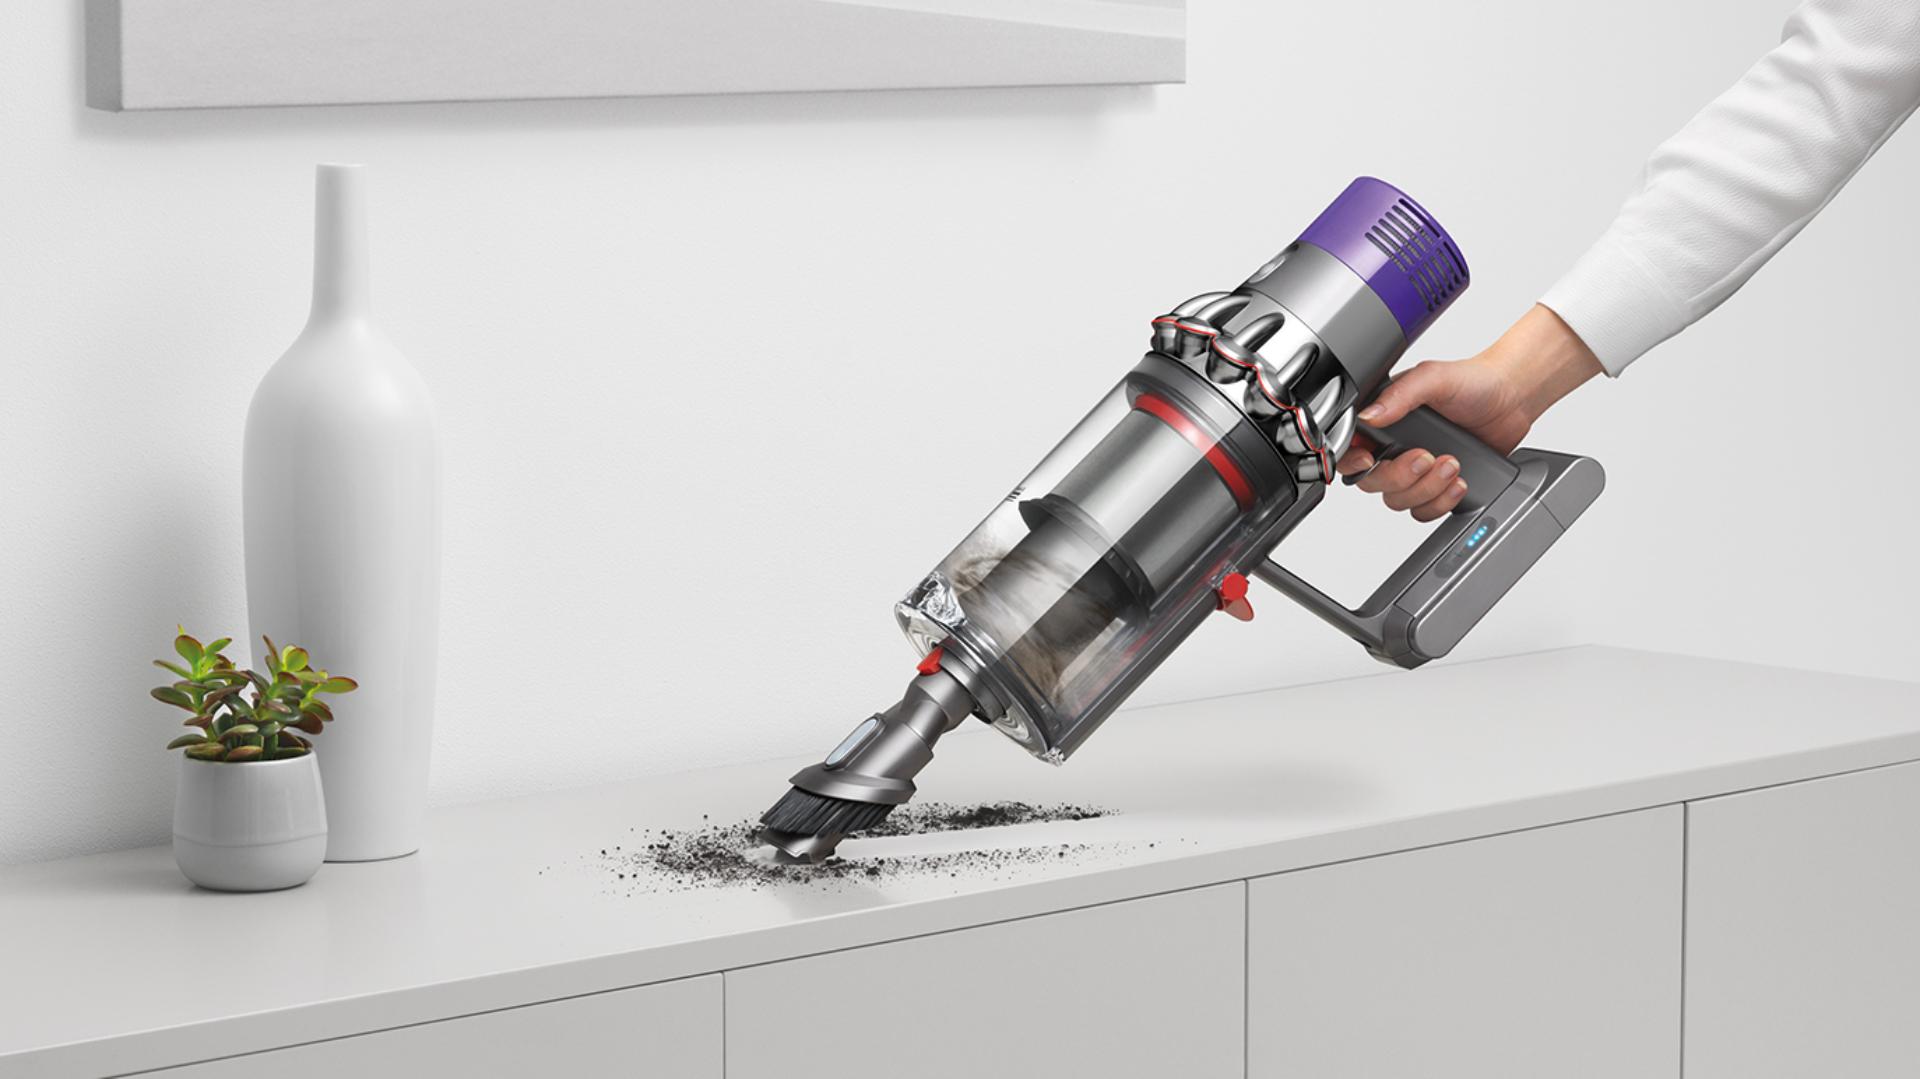 Dyson Cyclone V10™ vacuum in handheld mode cleaning car seat